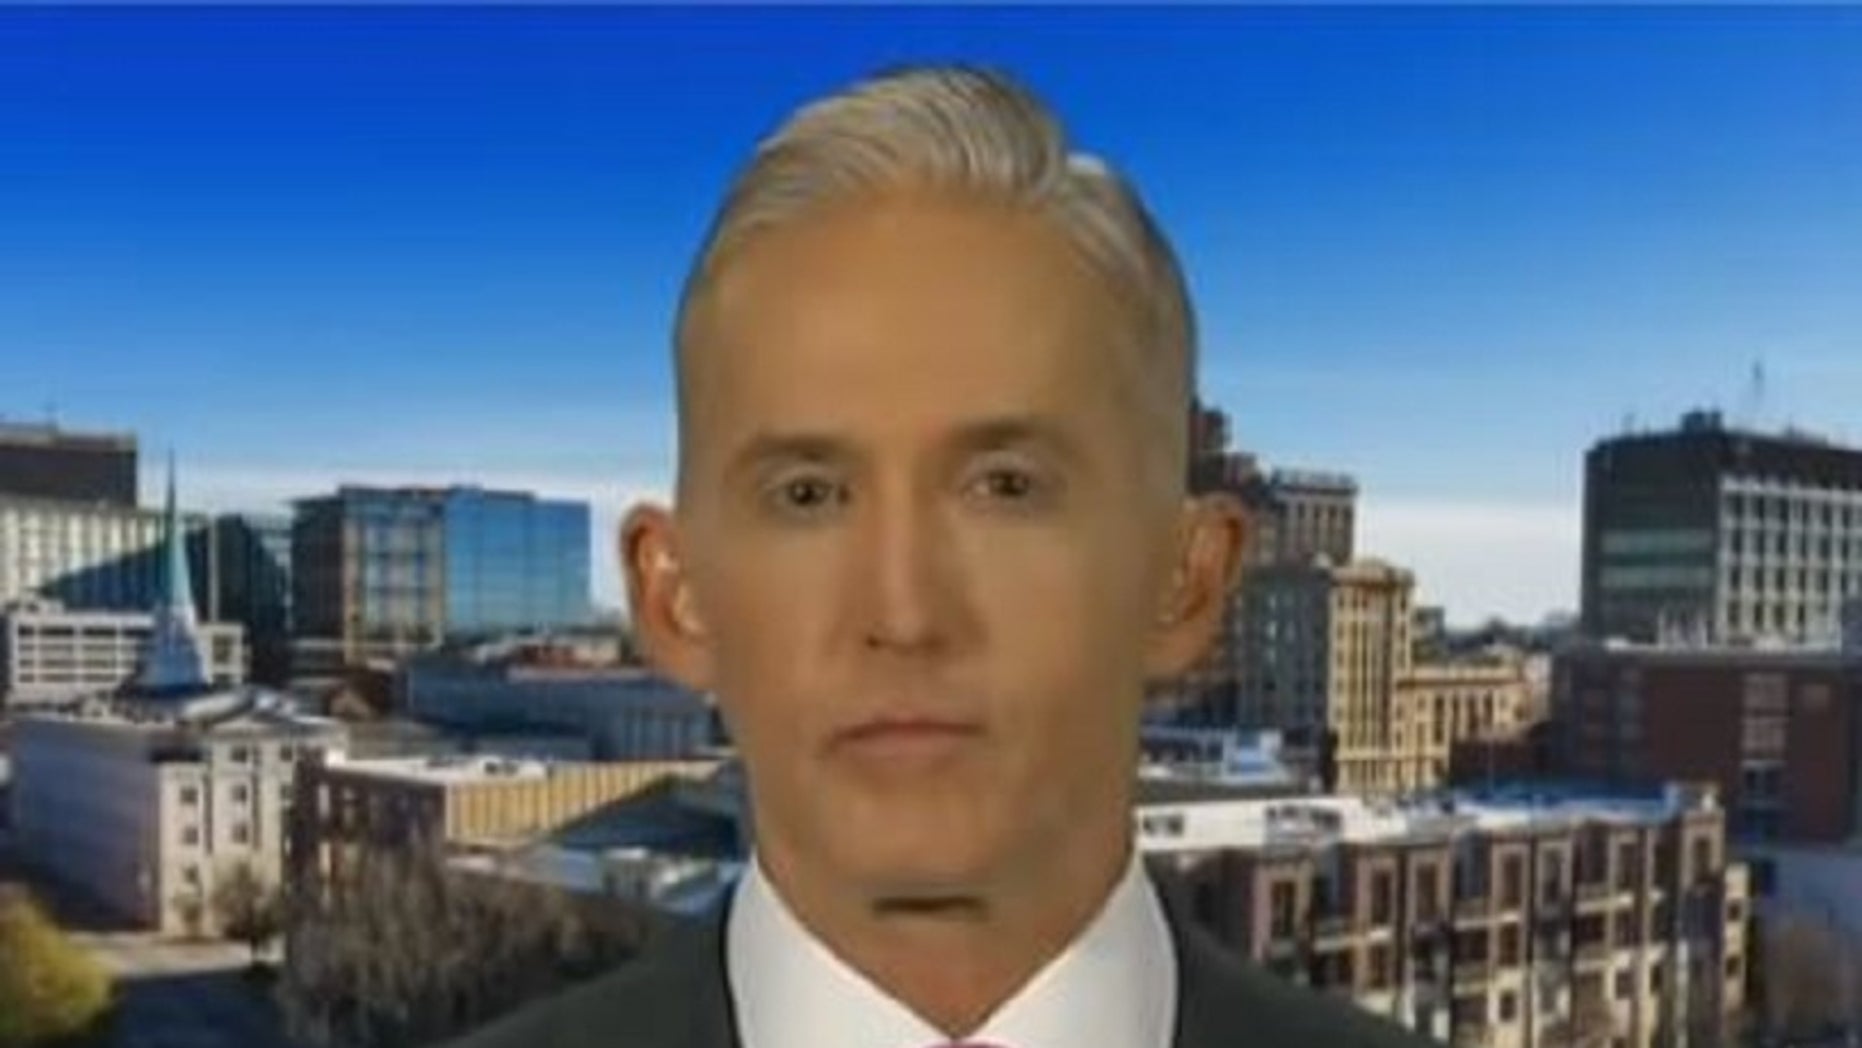 Trey Gowdy fires back after Warren claims he left Congress for 'fat